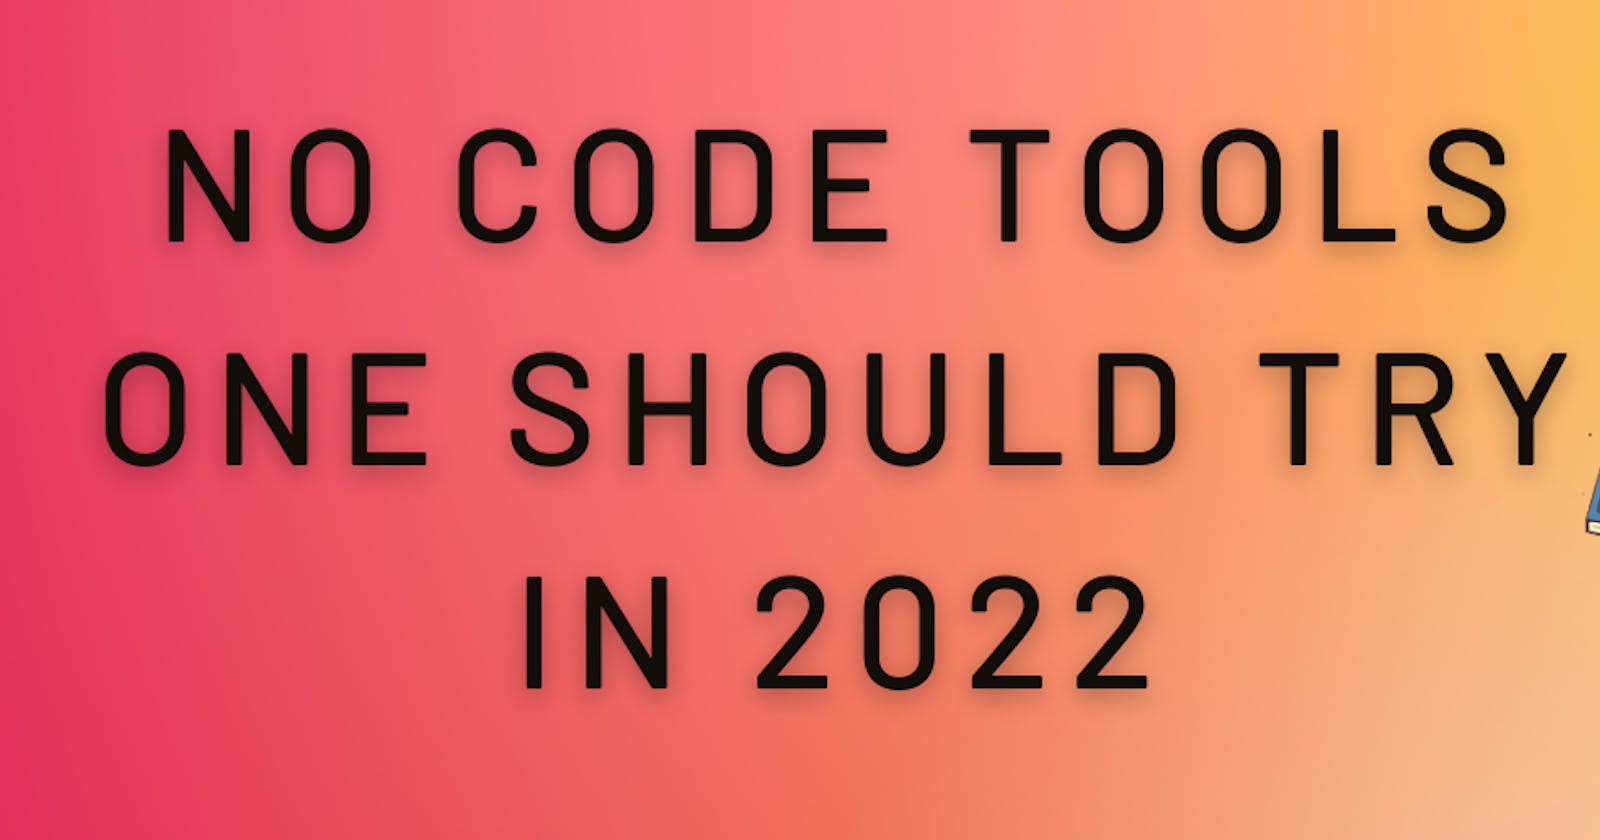 No-Code Tools one should try in 2022...